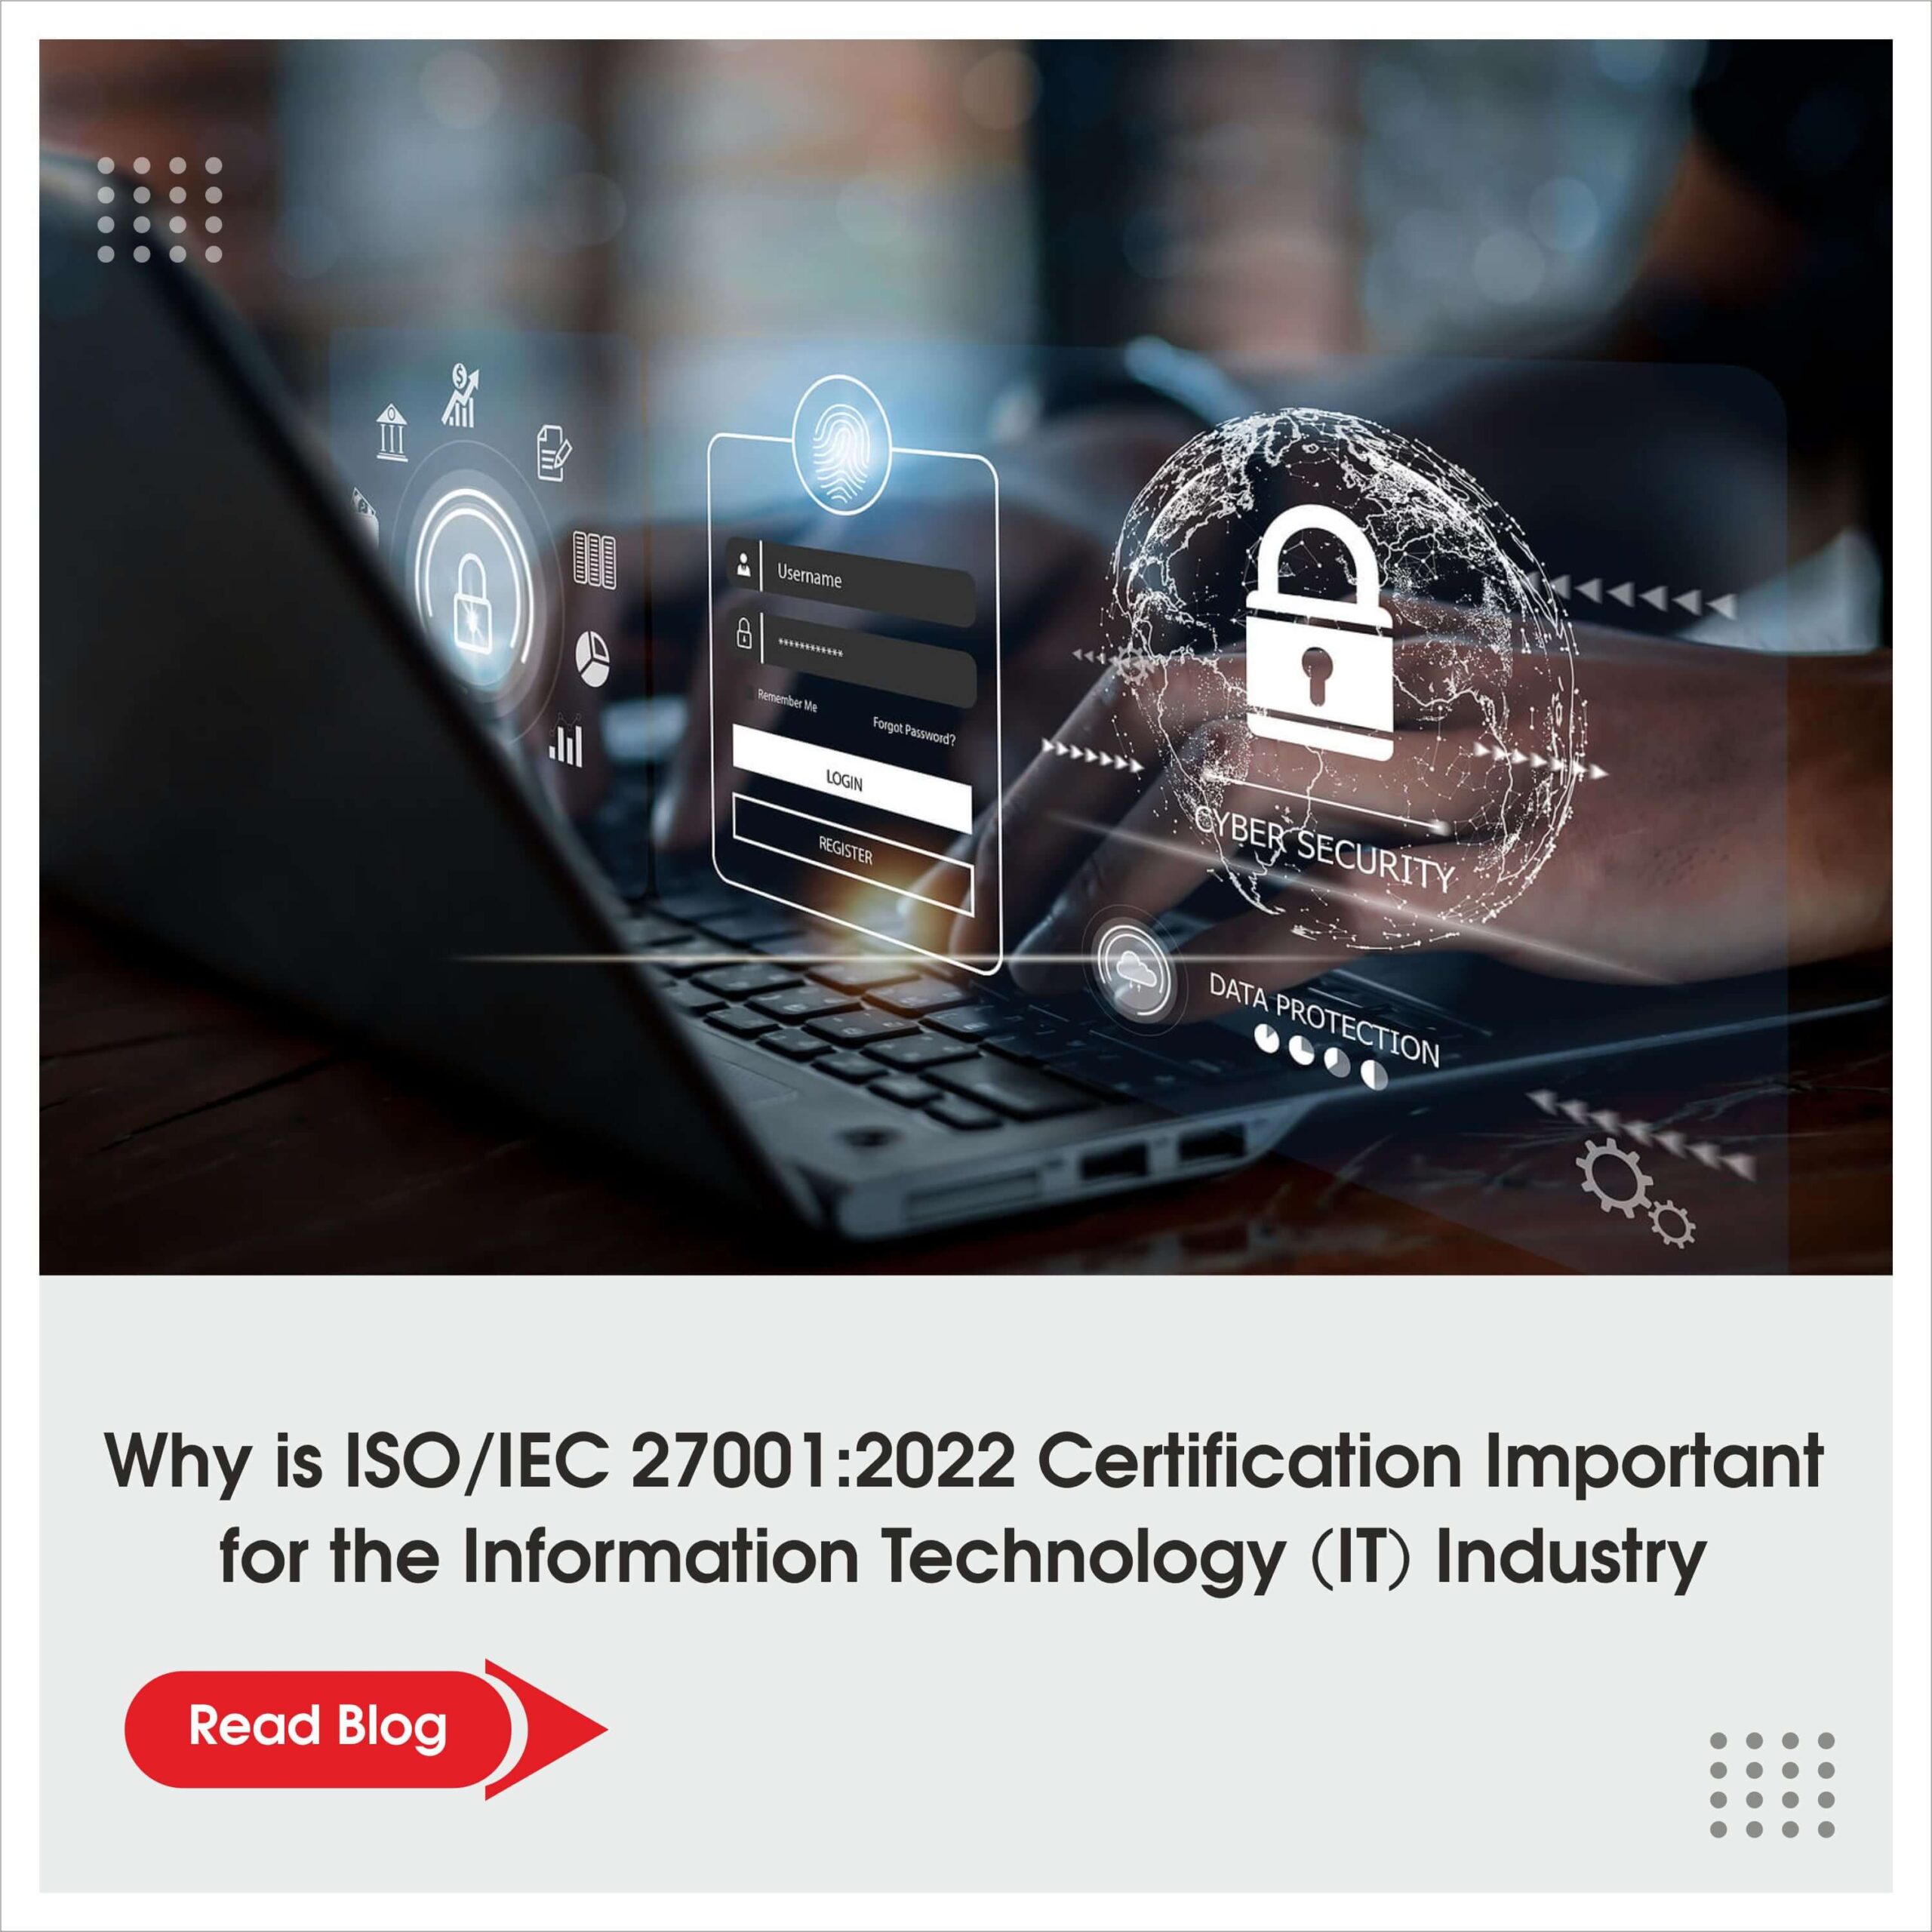 Why-is-ISO-IEC-27001-2022-Certification-Important-for-the-Information-Technology-IT-Industry-1-scaled